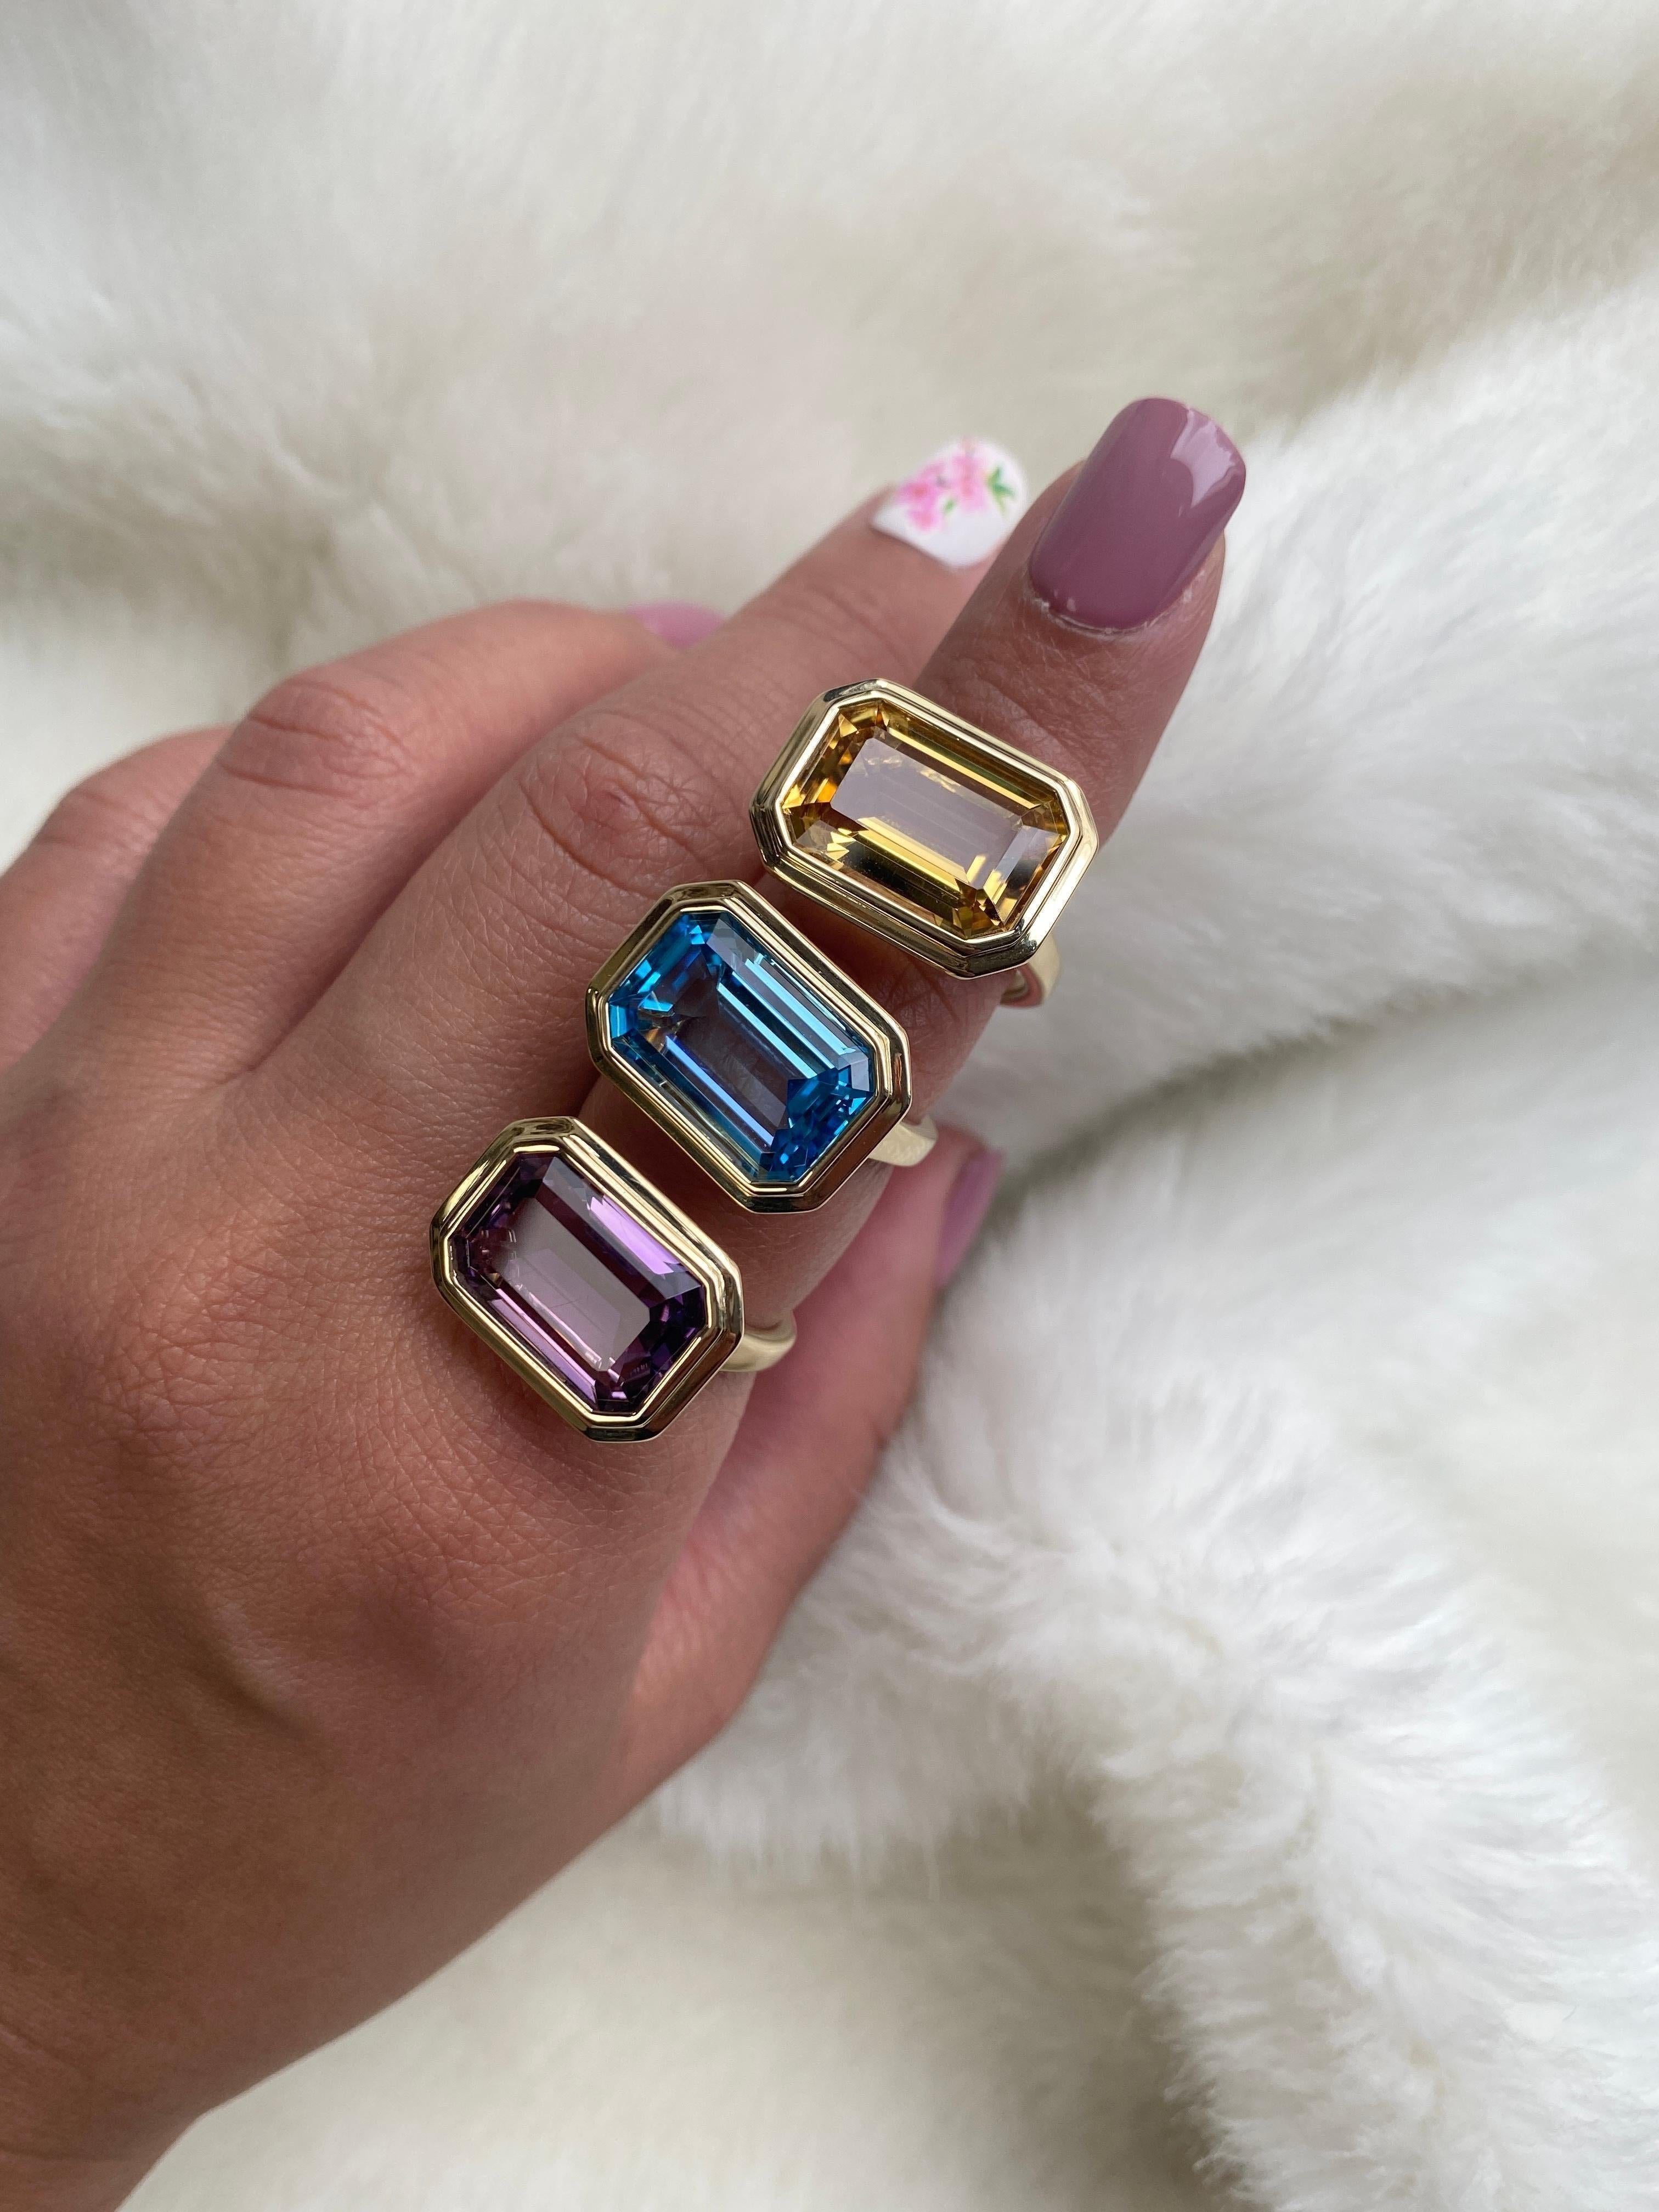 East-West Amethyst Emerald Cut Bezel Set Ring in 18K Yellow Gold, from 'Manhattan' Collection.  Minimalist lines yet bold structures is what our Manhattan Collection is all about. Our pieces represent the famous skyline and cityscapes of New York